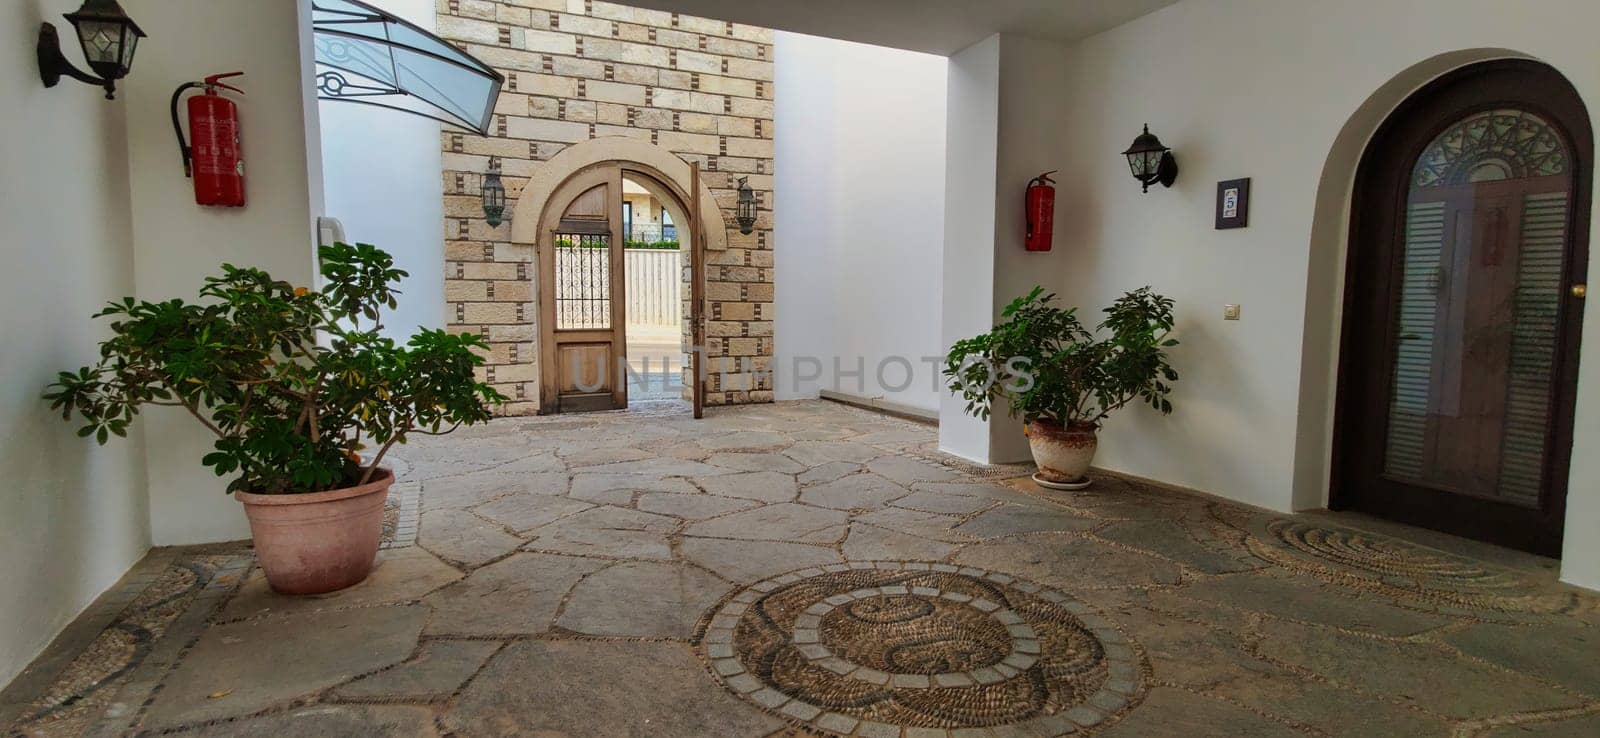 Large old house entrance interior with green plant and brick walls. download photo